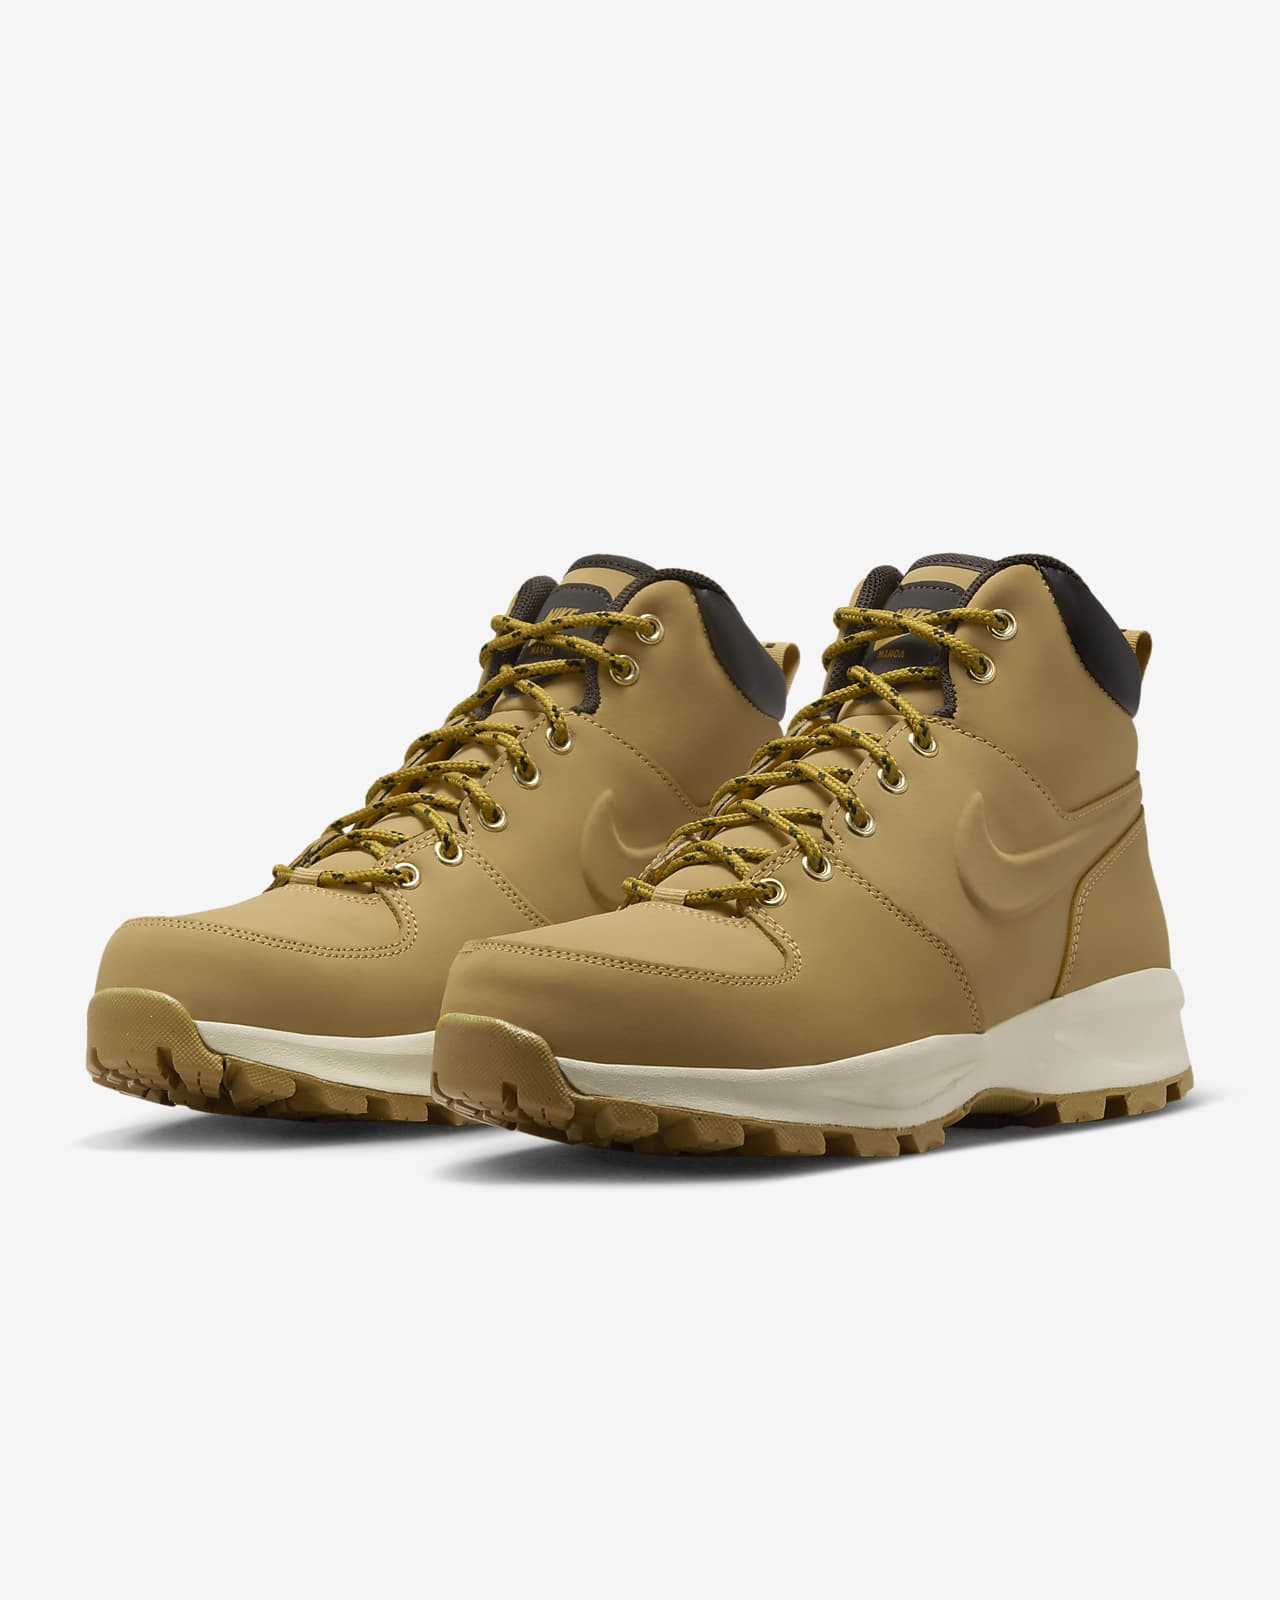 Nike Manoa Leather Men\'s Boots.